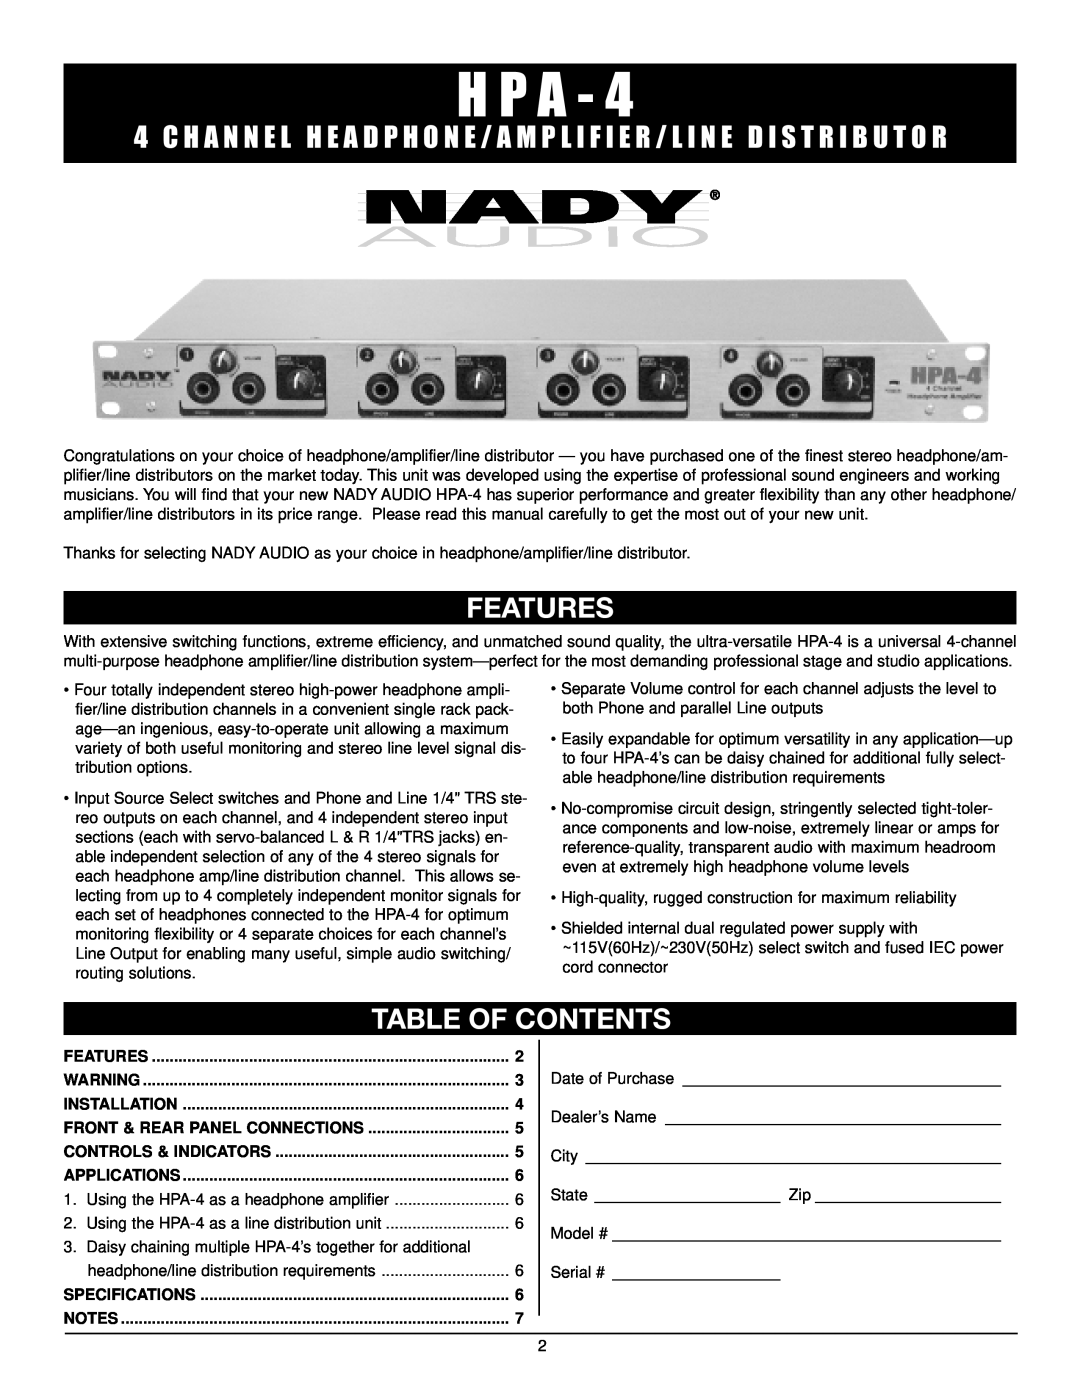 Nady Systems HPA-4 manual Features, Table Of Contents, H P A 